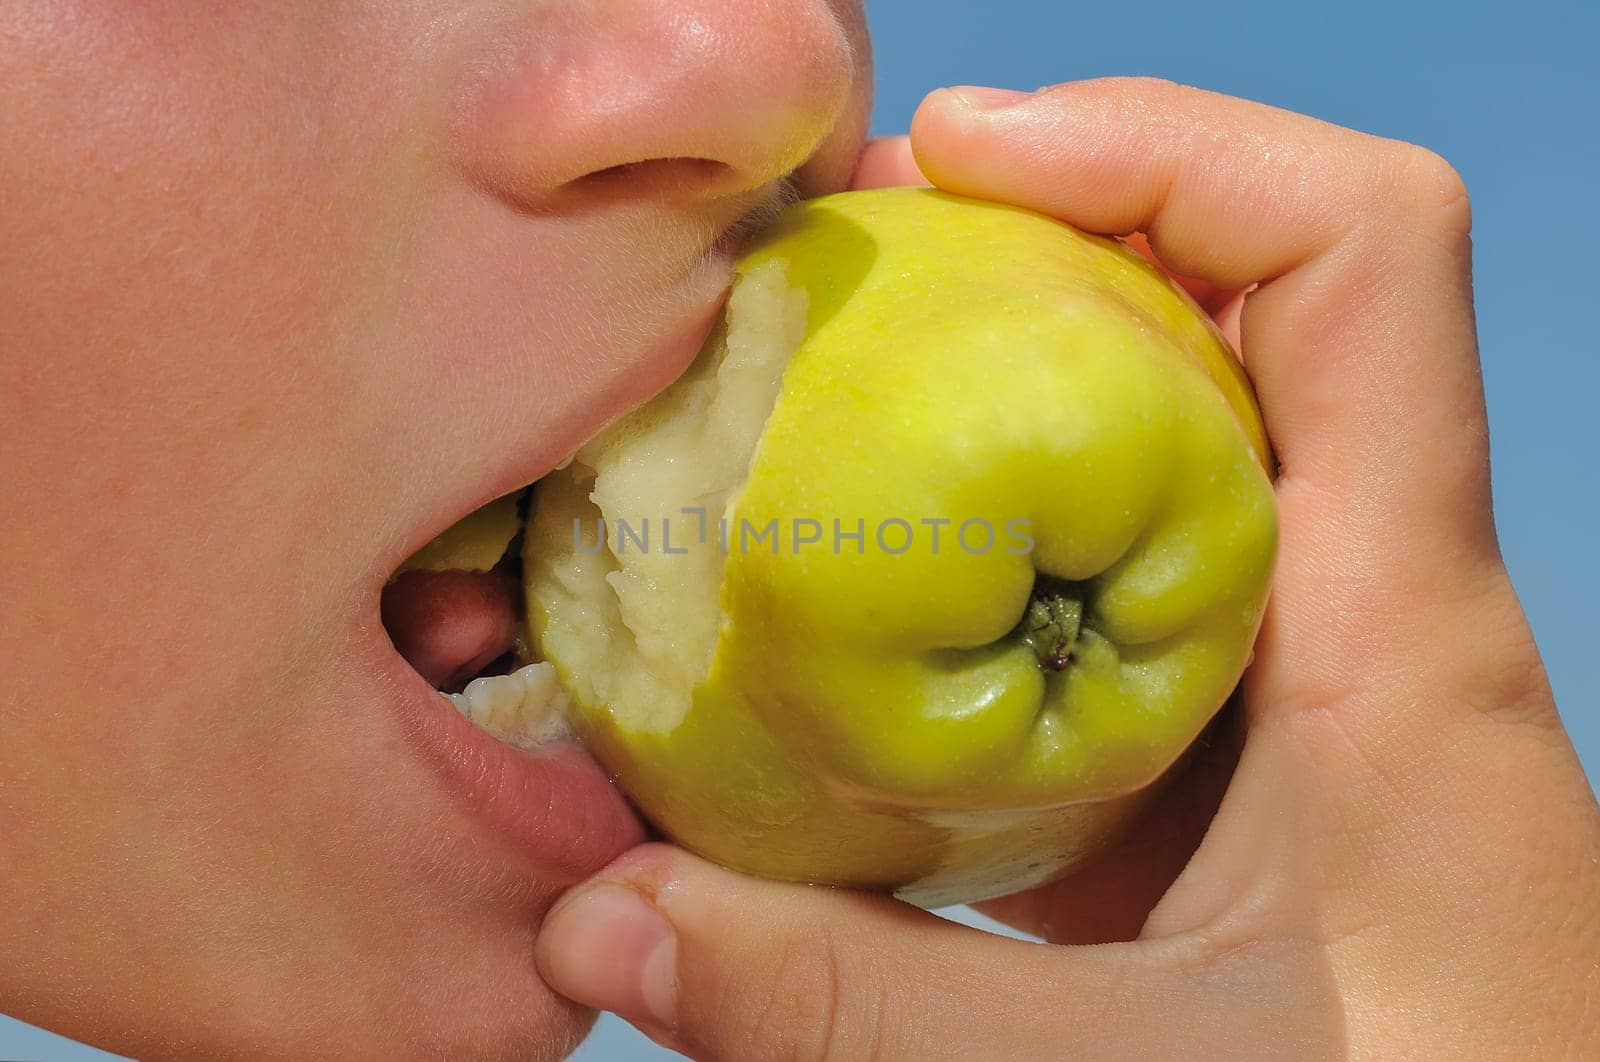 A boy is bitten by a hard green apple, which he holds tightly in his hand.